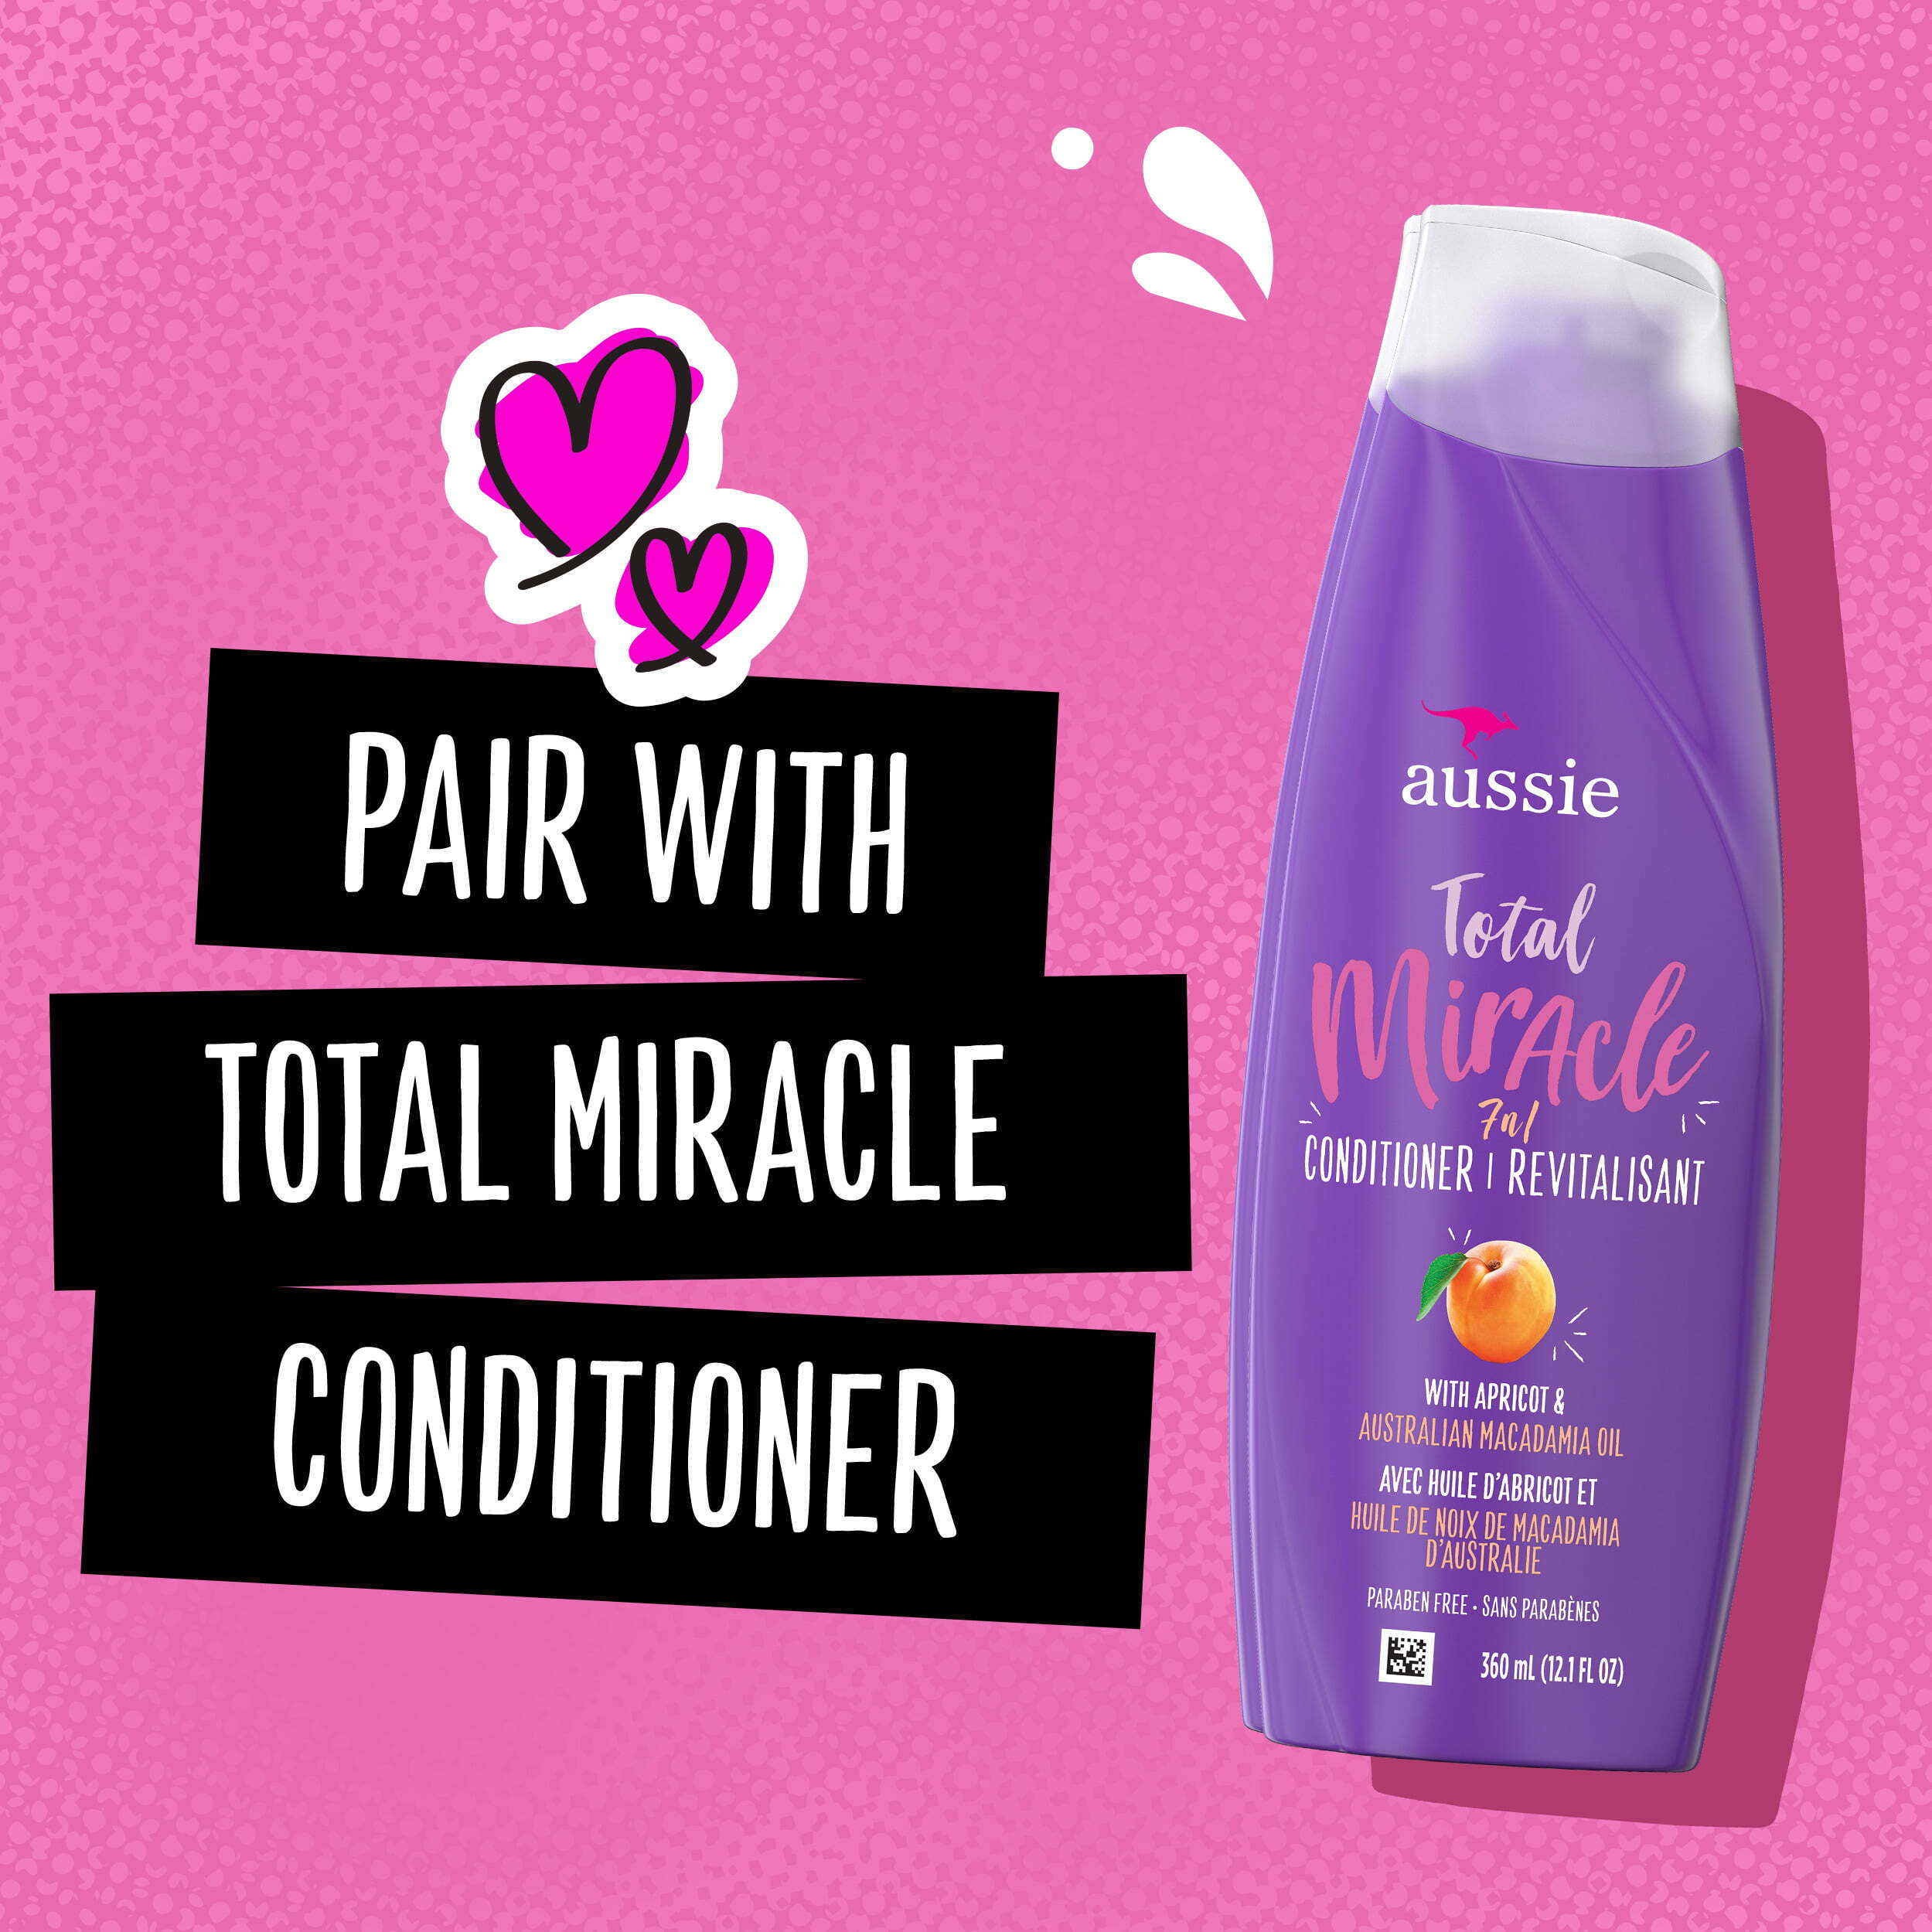 Aussie Total Miracle Shampoo for All Hair Types 12.1 fl oz - image 7 of 8